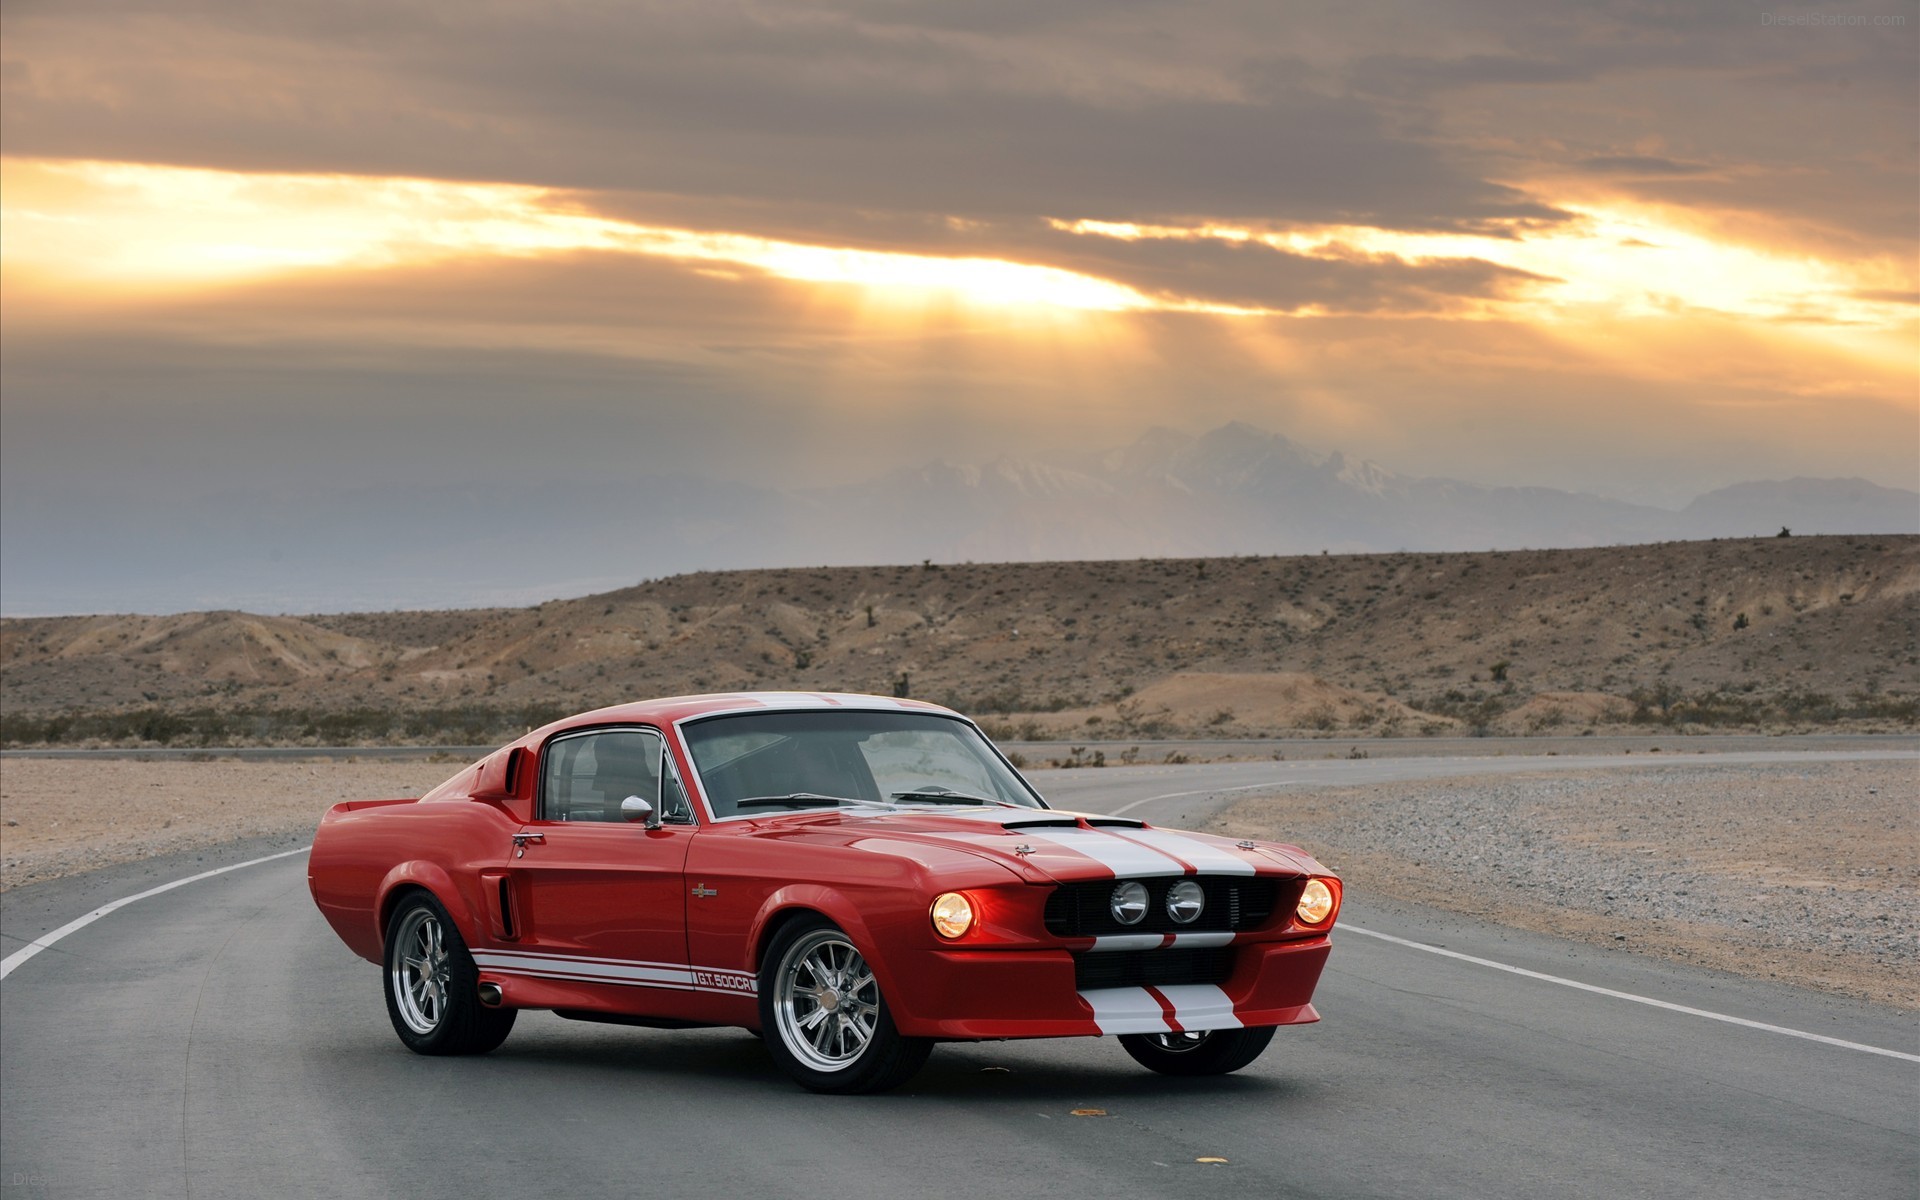 Mustang Shelby Fastback Dream Vehicles